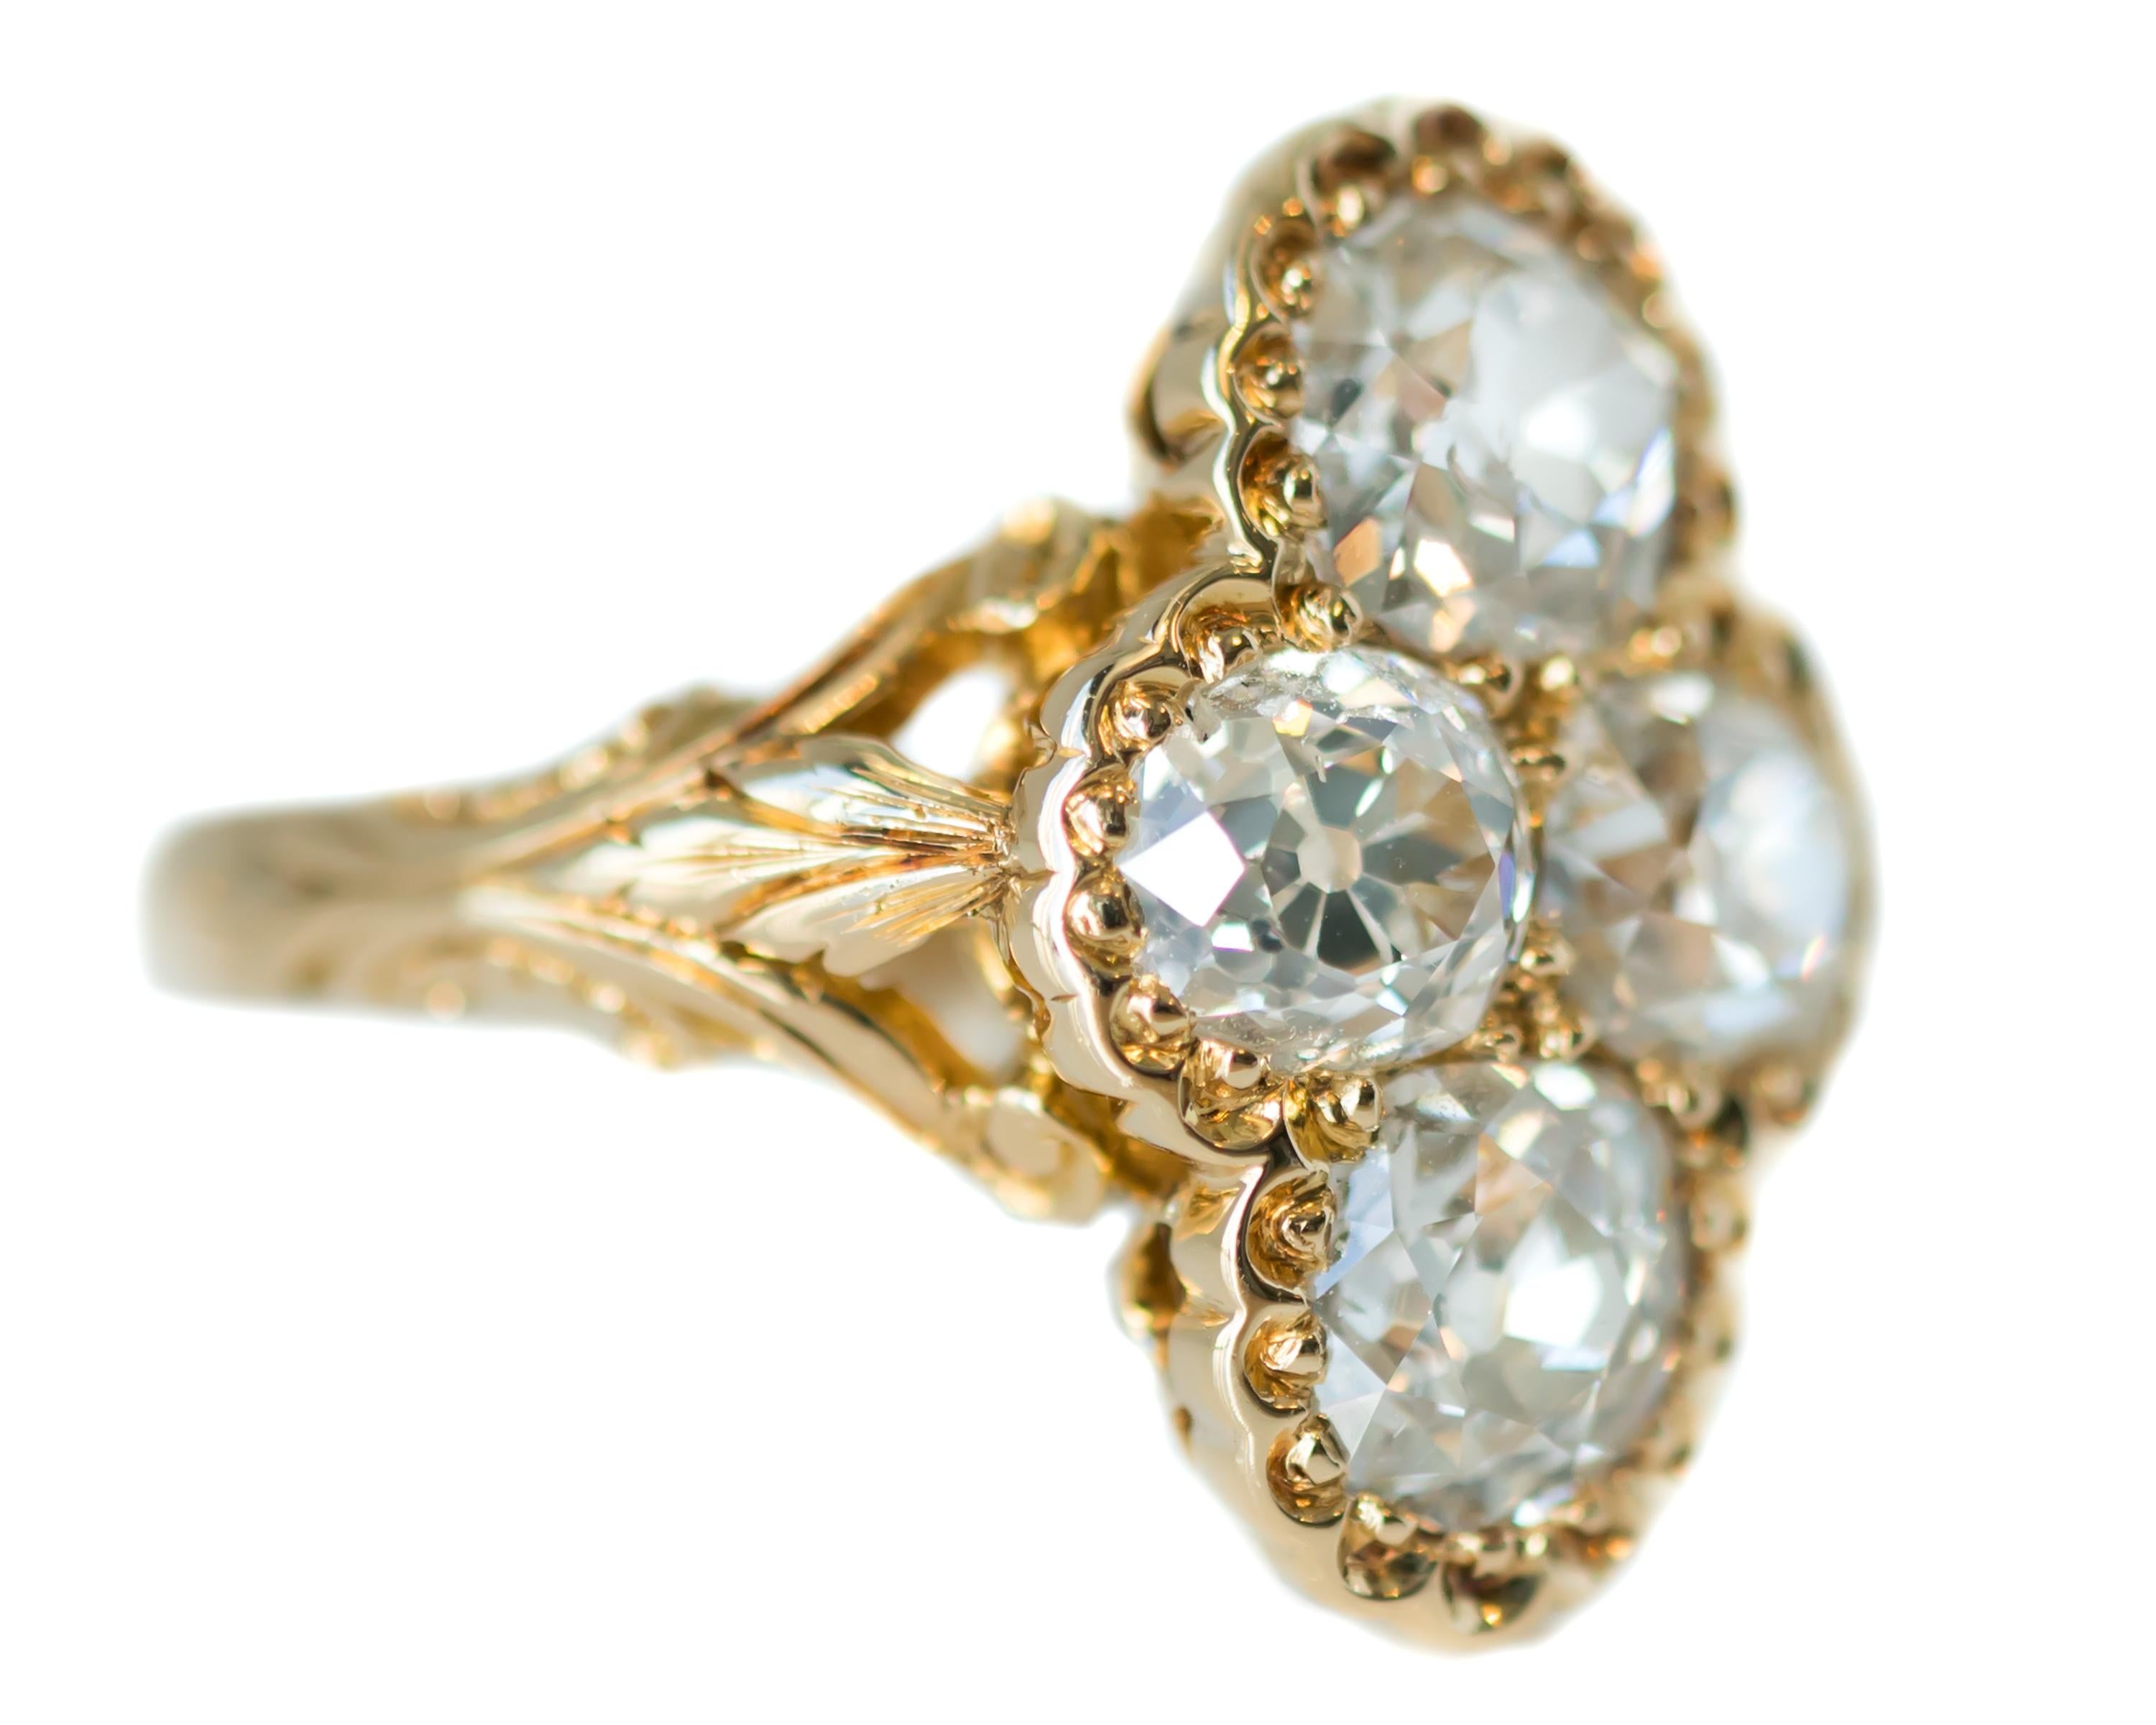 Antique Victorian Diamond Ring - 18 Karat Yellow Gold, Old Mine Diamonds

Features:
2.2 carat total Old Mine Diamonds ( Quantity 4)
18 Karat Yellow Gold Setting
Each stone is set with 12 - 13 Prongs
Delicate Floral Detailed Frame
Open cut out